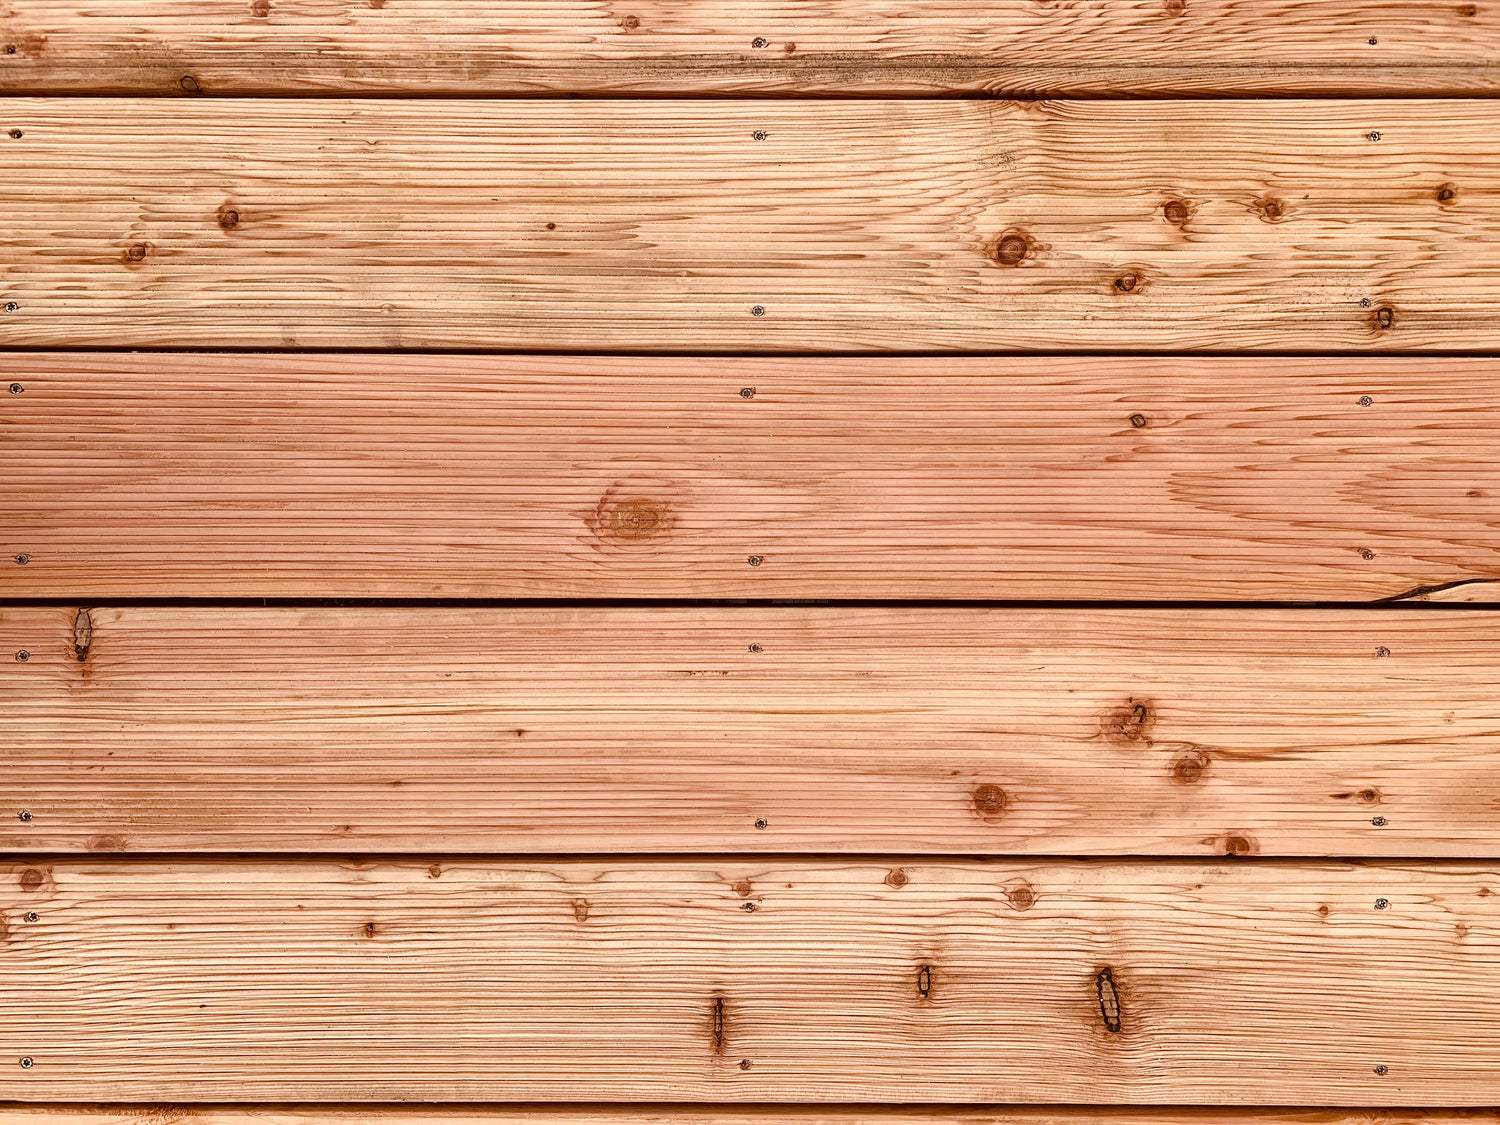 A close-up of a wooden surface composed of multiple horizontal planks. The wood has a light, natural hue with visible grain patterns, knots, and small nail holes. The planks are evenly spaced and appear smooth and well-finished.